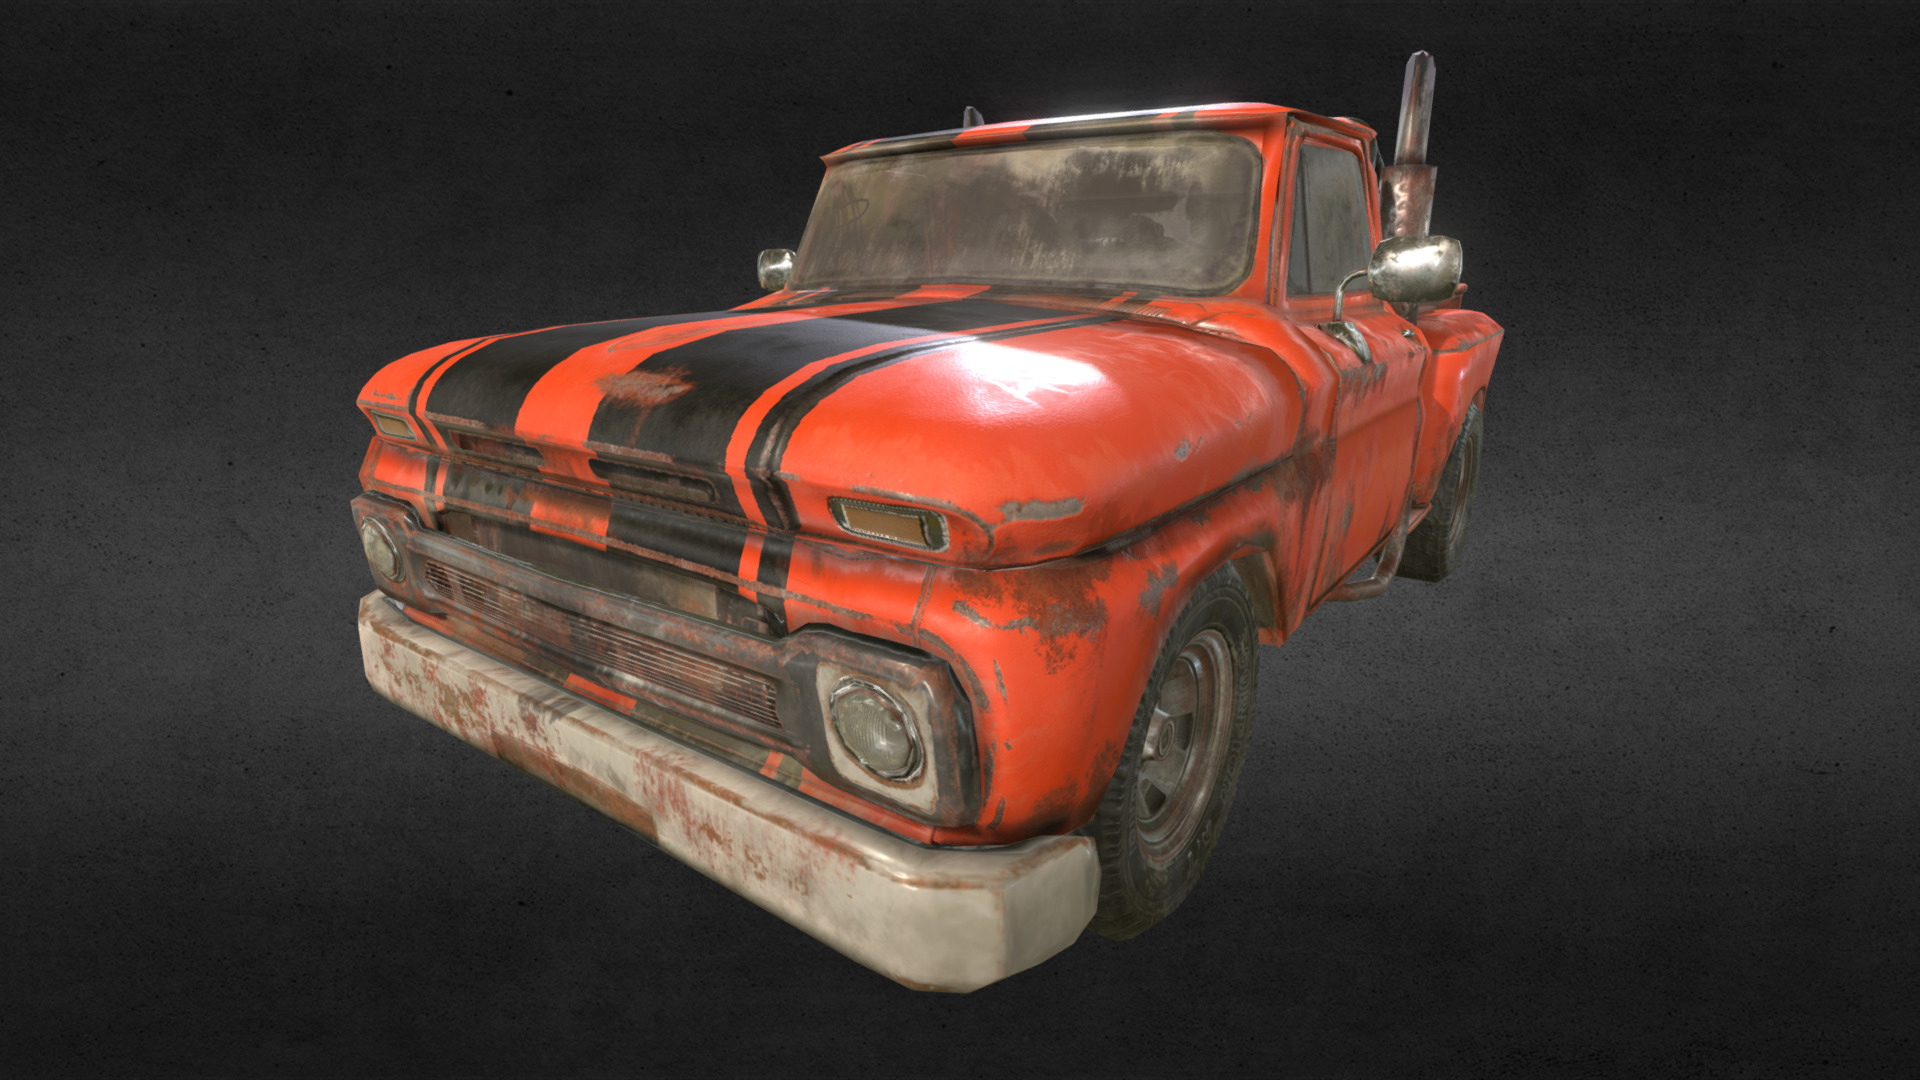 3D model Chevrolet pickup truck - This is a 3D model of the Chevrolet pickup truck. The 3D model is about a red car parked on a black surface.